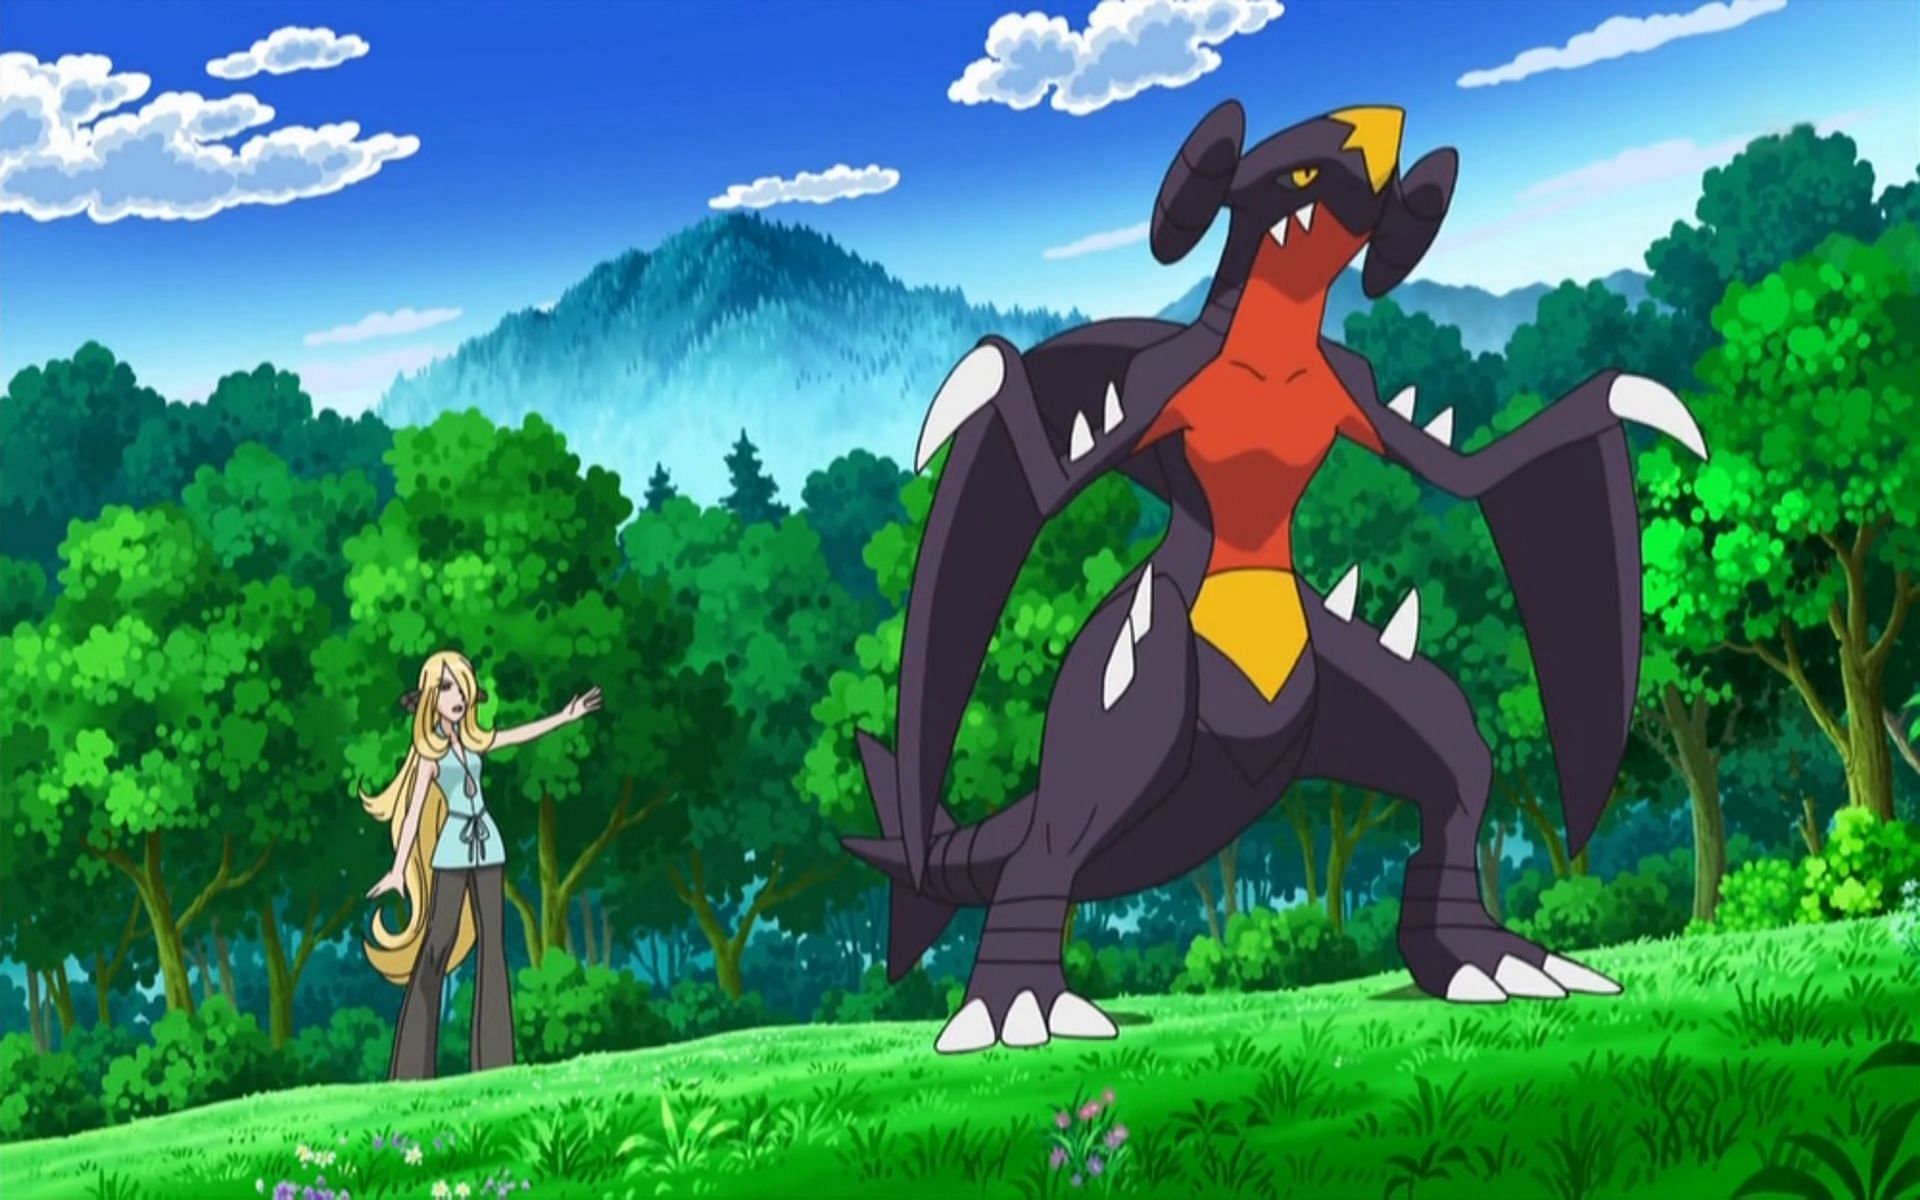 Garchomp as it appears in the anime (Image via The Pokemon Company)